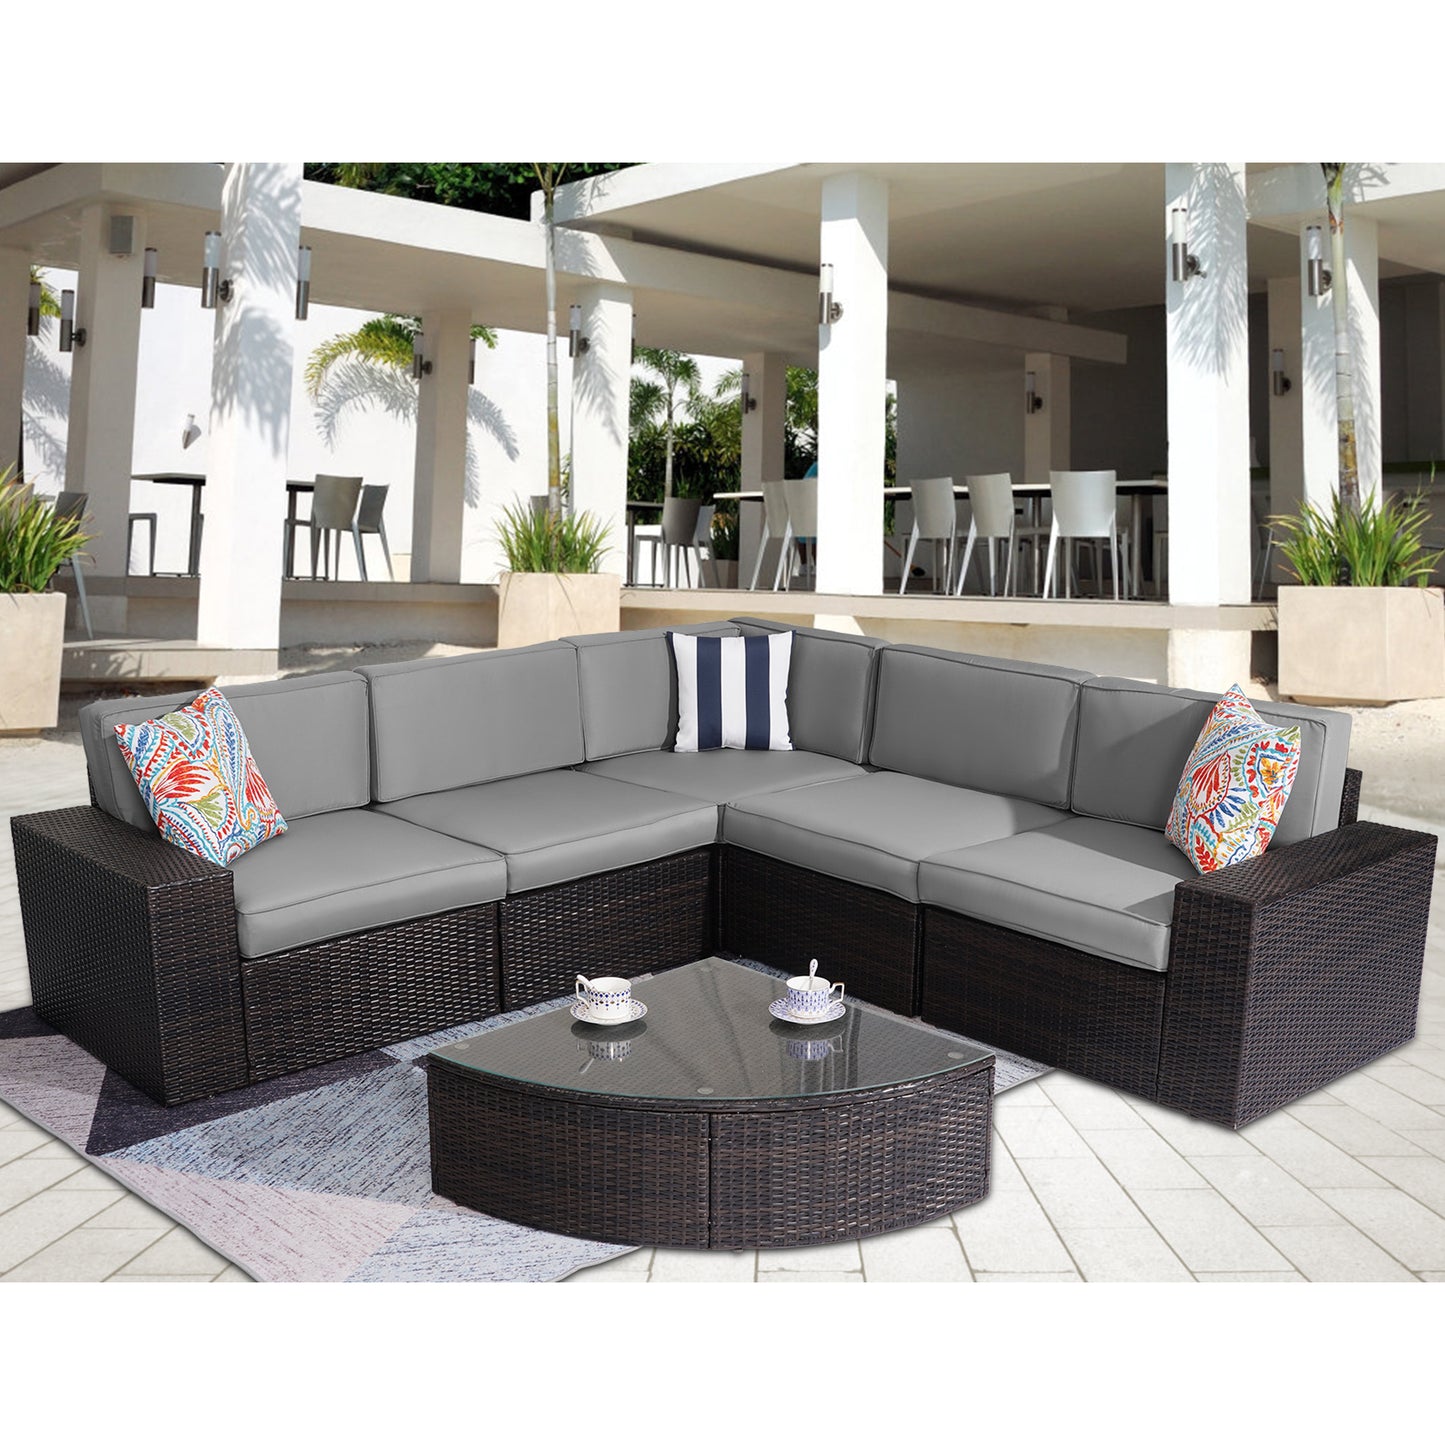 Outdoor Patio Furniture Sets, 6-Piece Furniture Patio Sectional Sofa Couch Patio Conversation Set, All-Weather Rattan Wicker Patio Sofa for Pool, Deck and Backyard, Grey